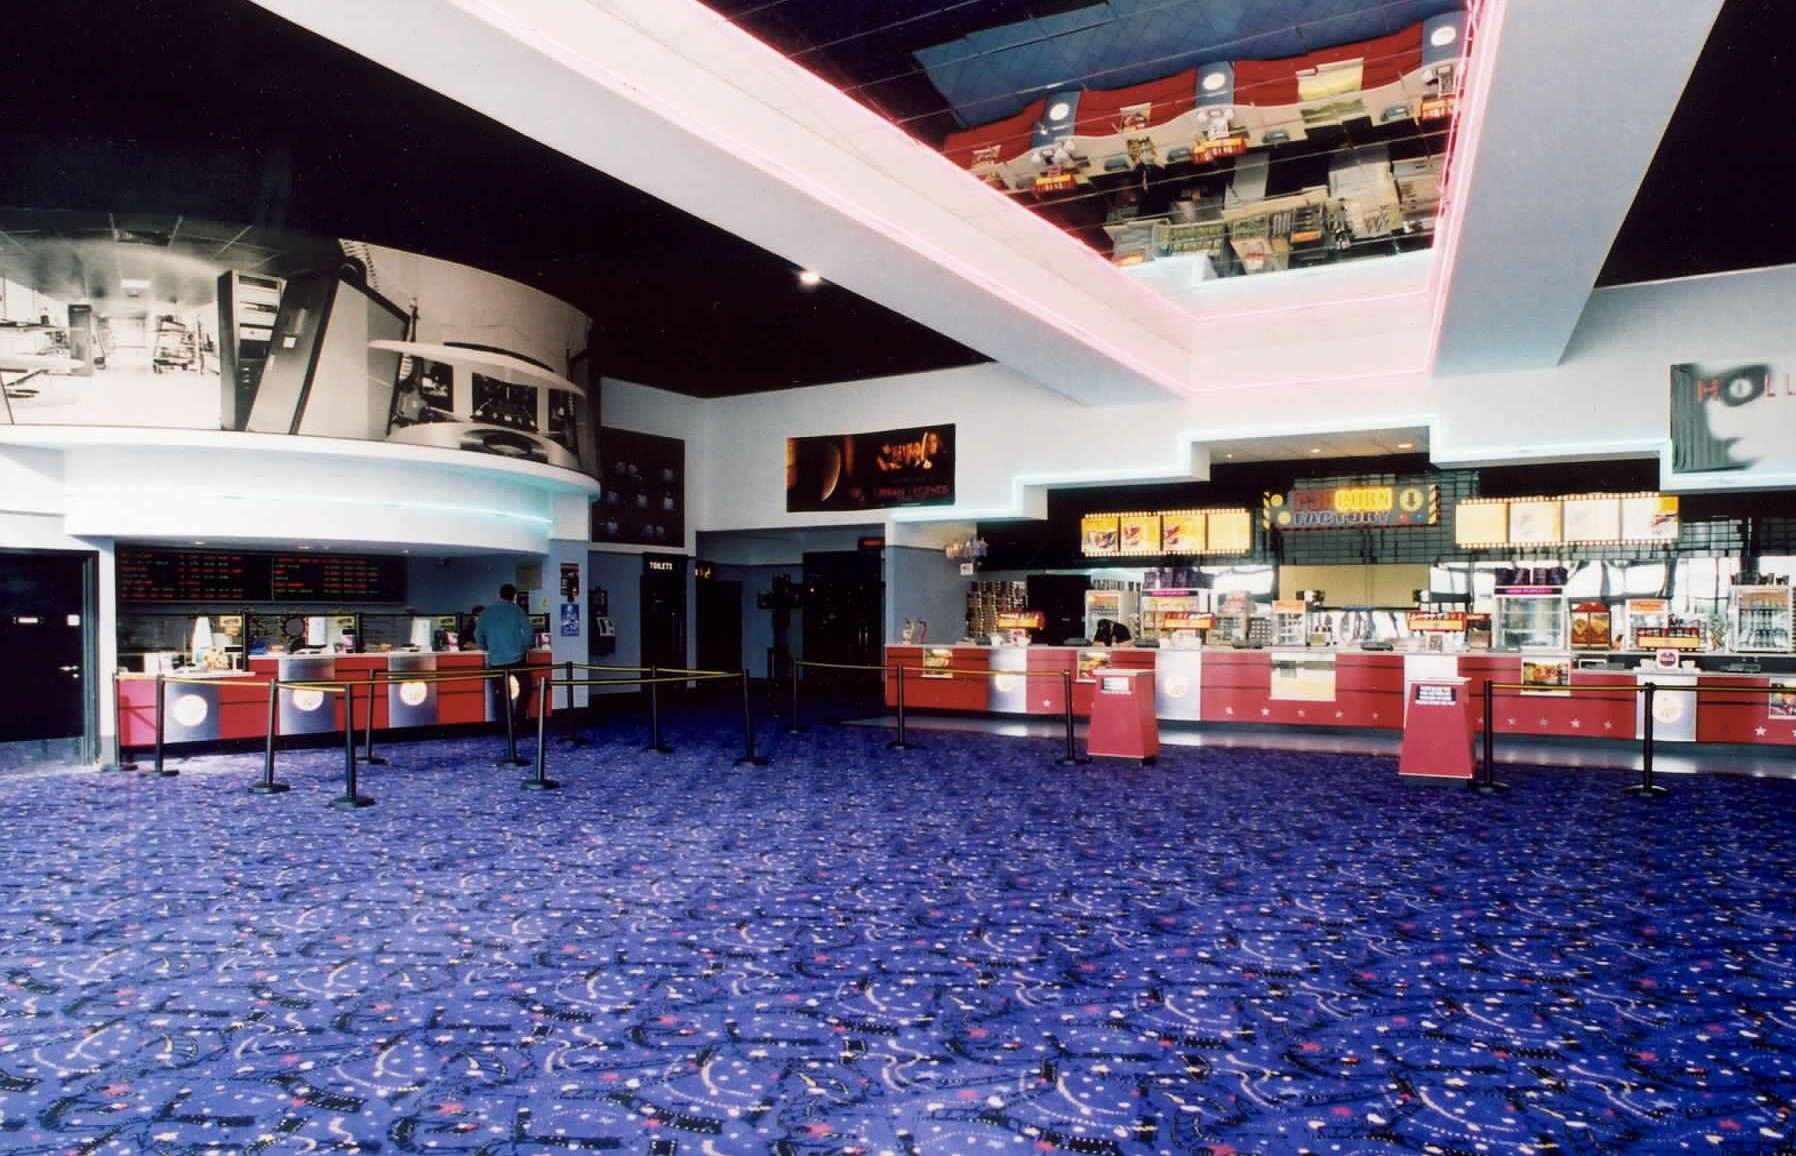 The main foyer at Ashford's Cineworld in December 2002 featuring its huge mirrored ceiling